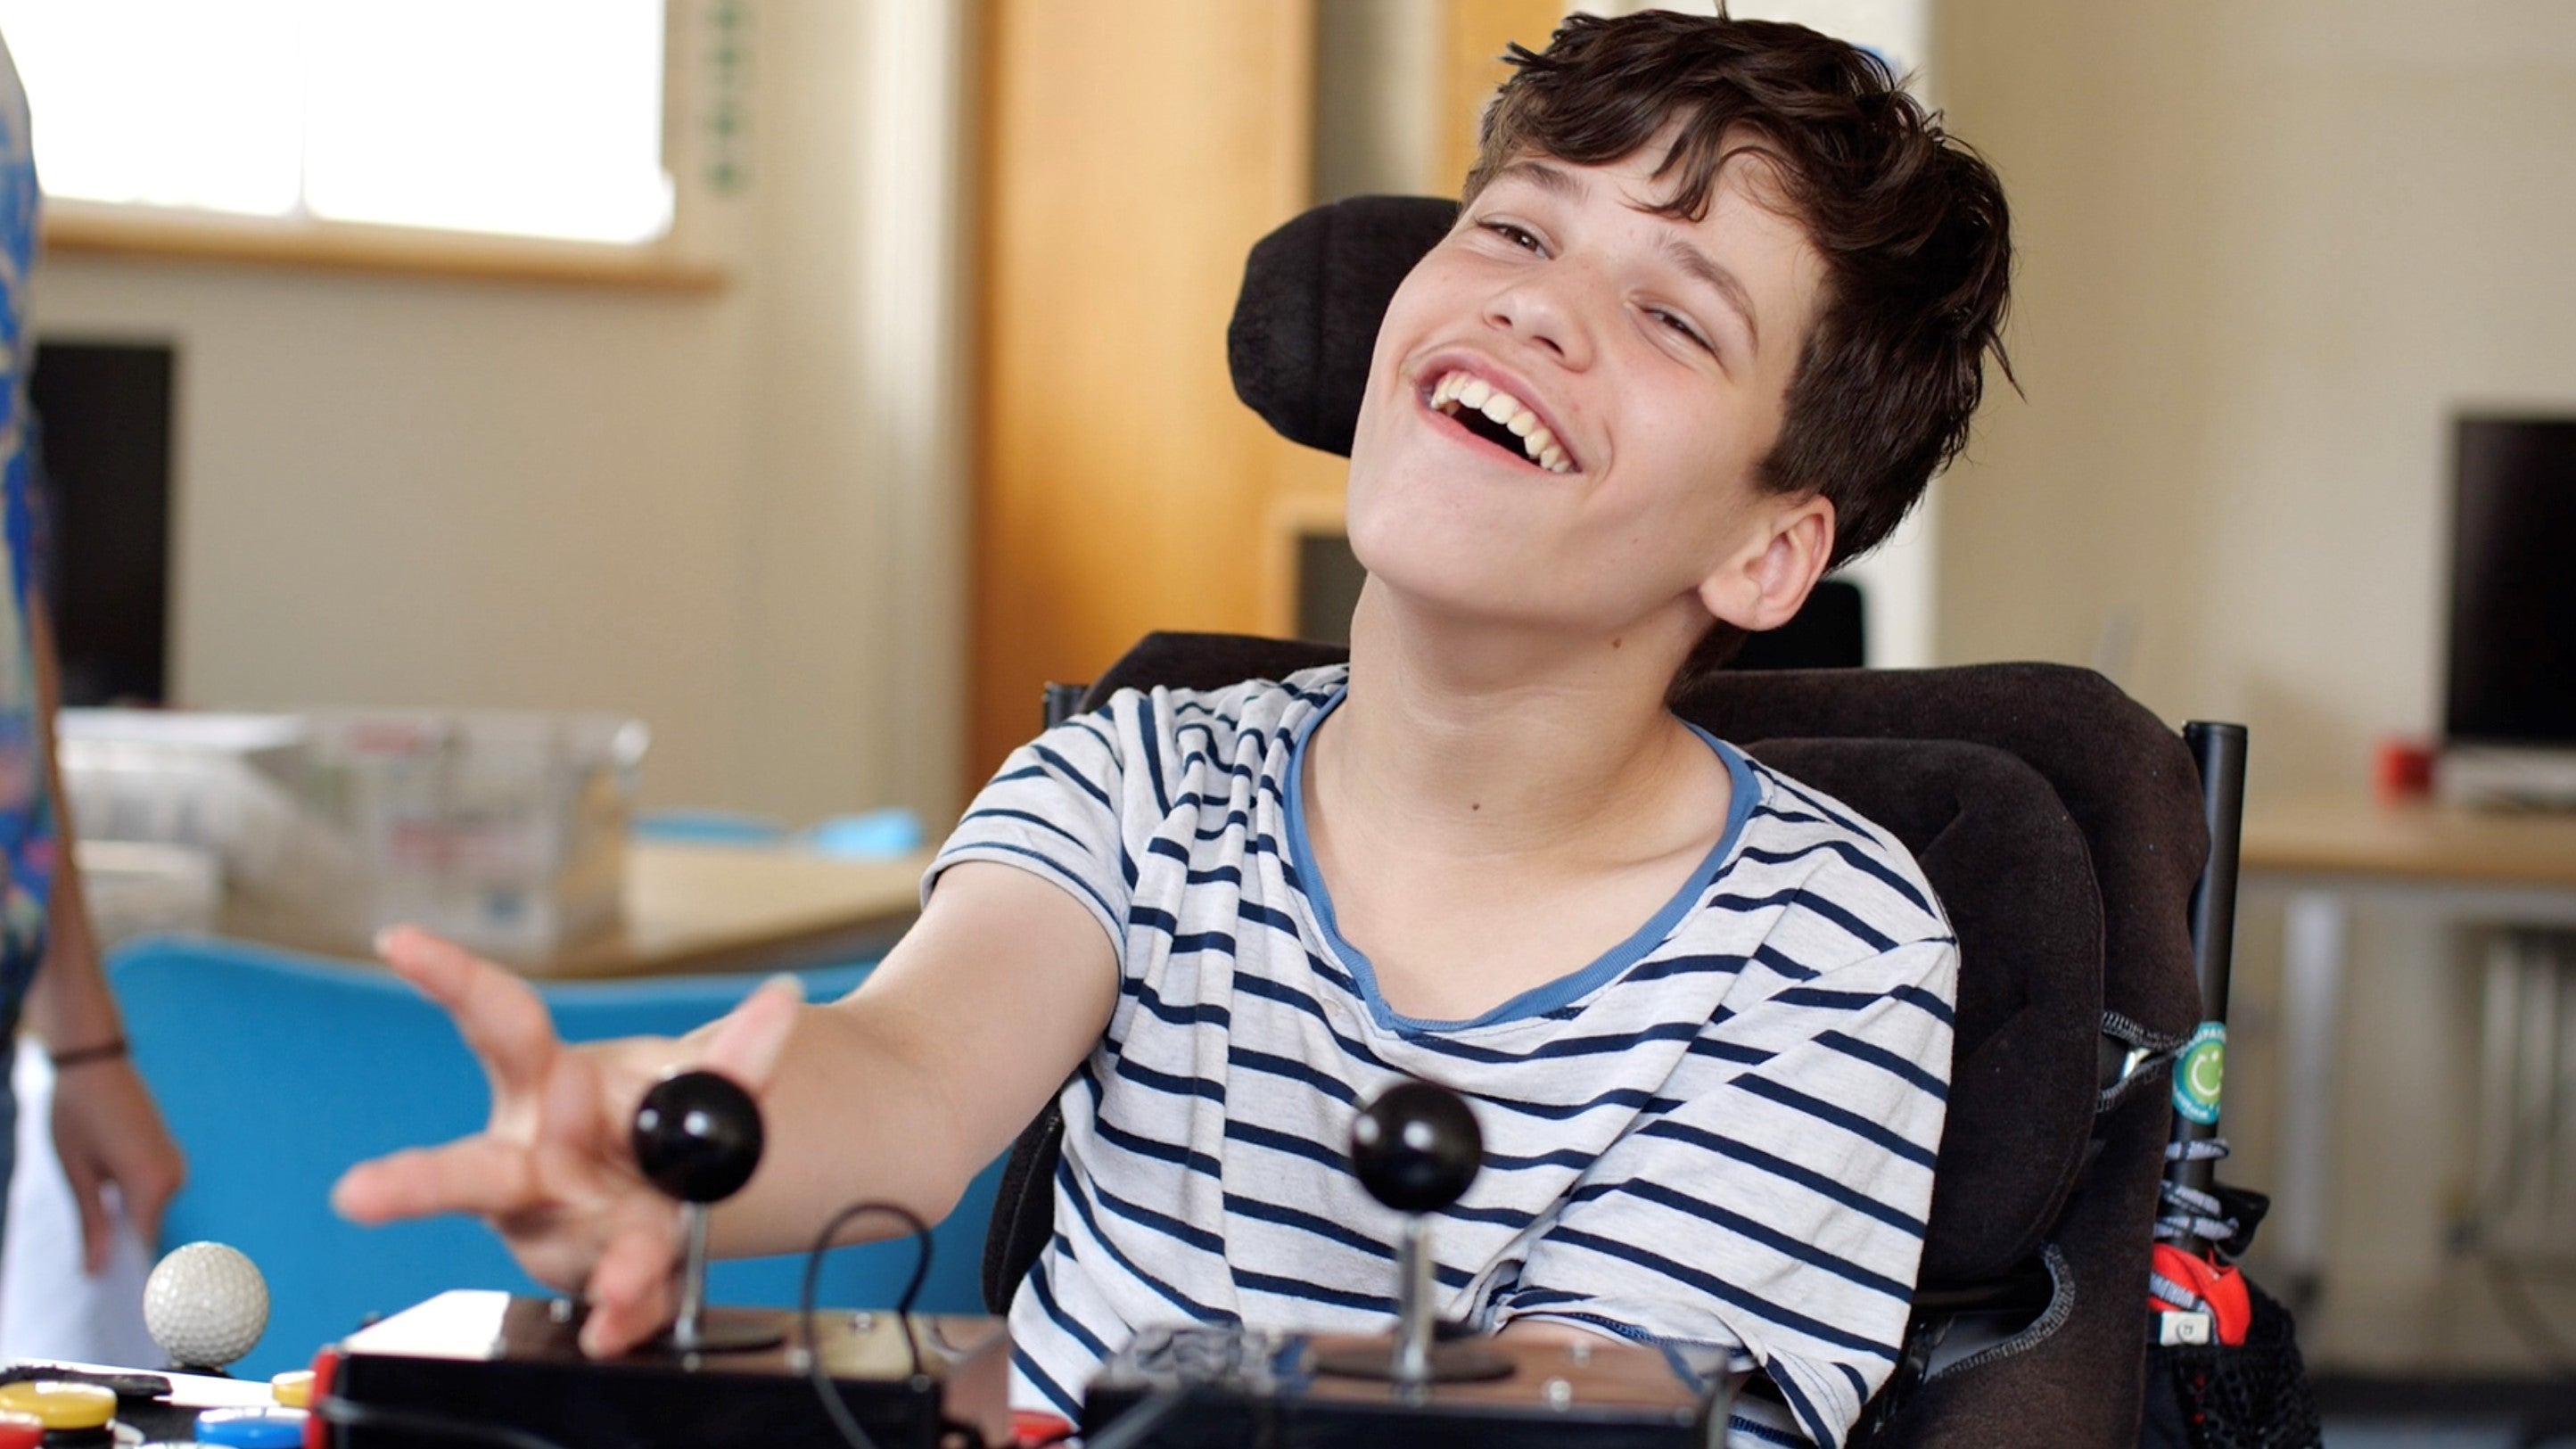 A boy with physical disabilities using bespoke gaming controllers to play a game. He is delighted and his smile says a thousand words.